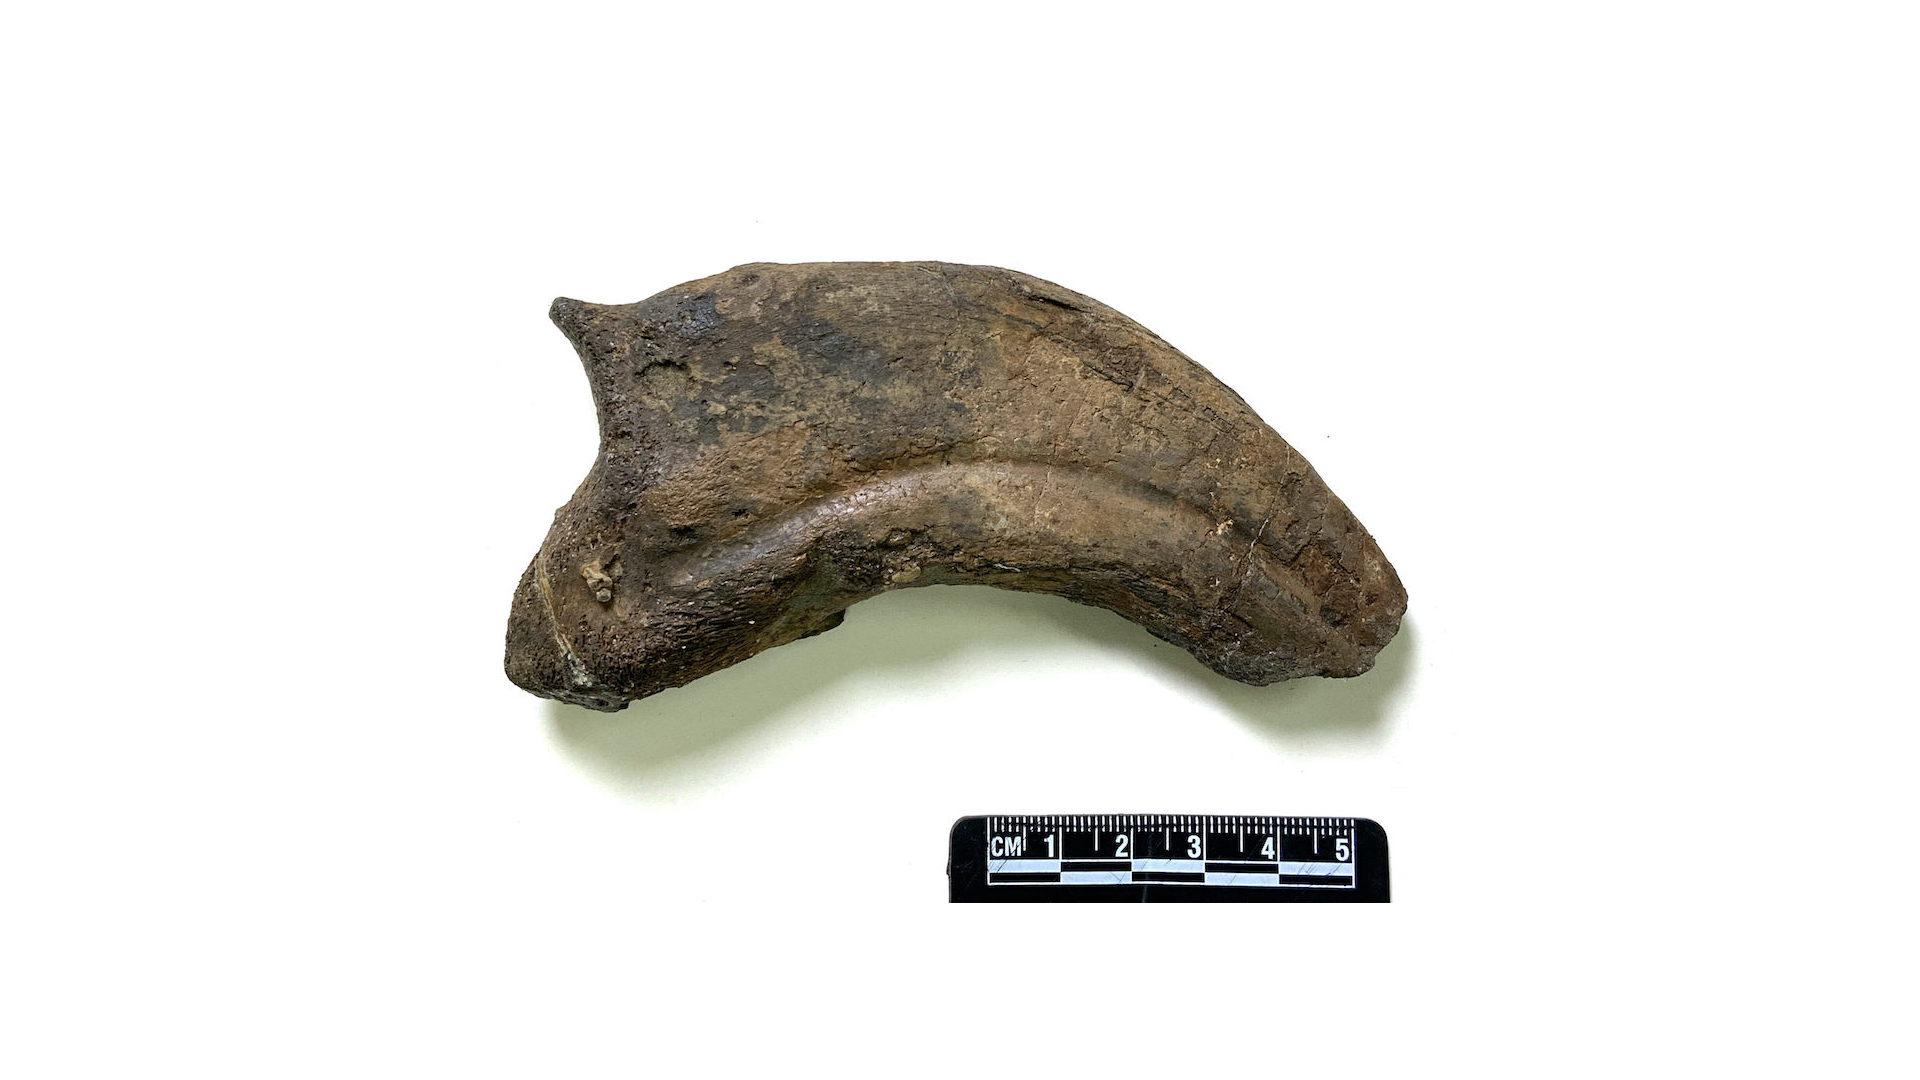 One of the three fossilized claws of Paralitherizinosaurus japonicus described in the new study.